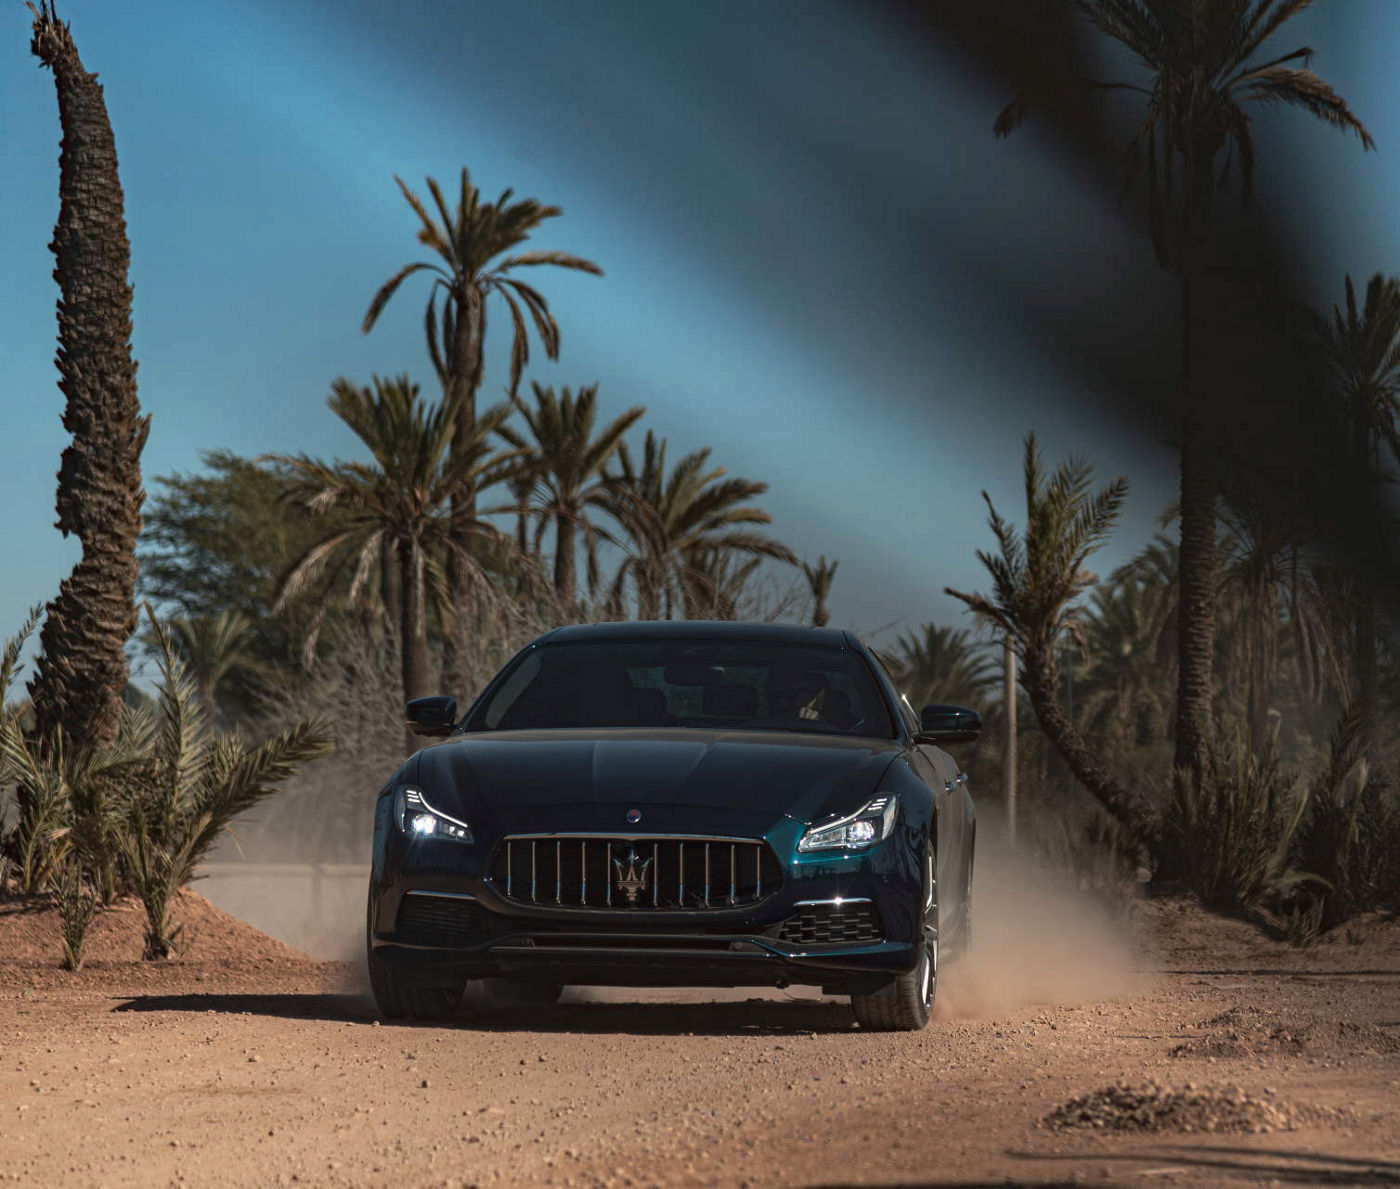 Maserati Royale in a street in the desert